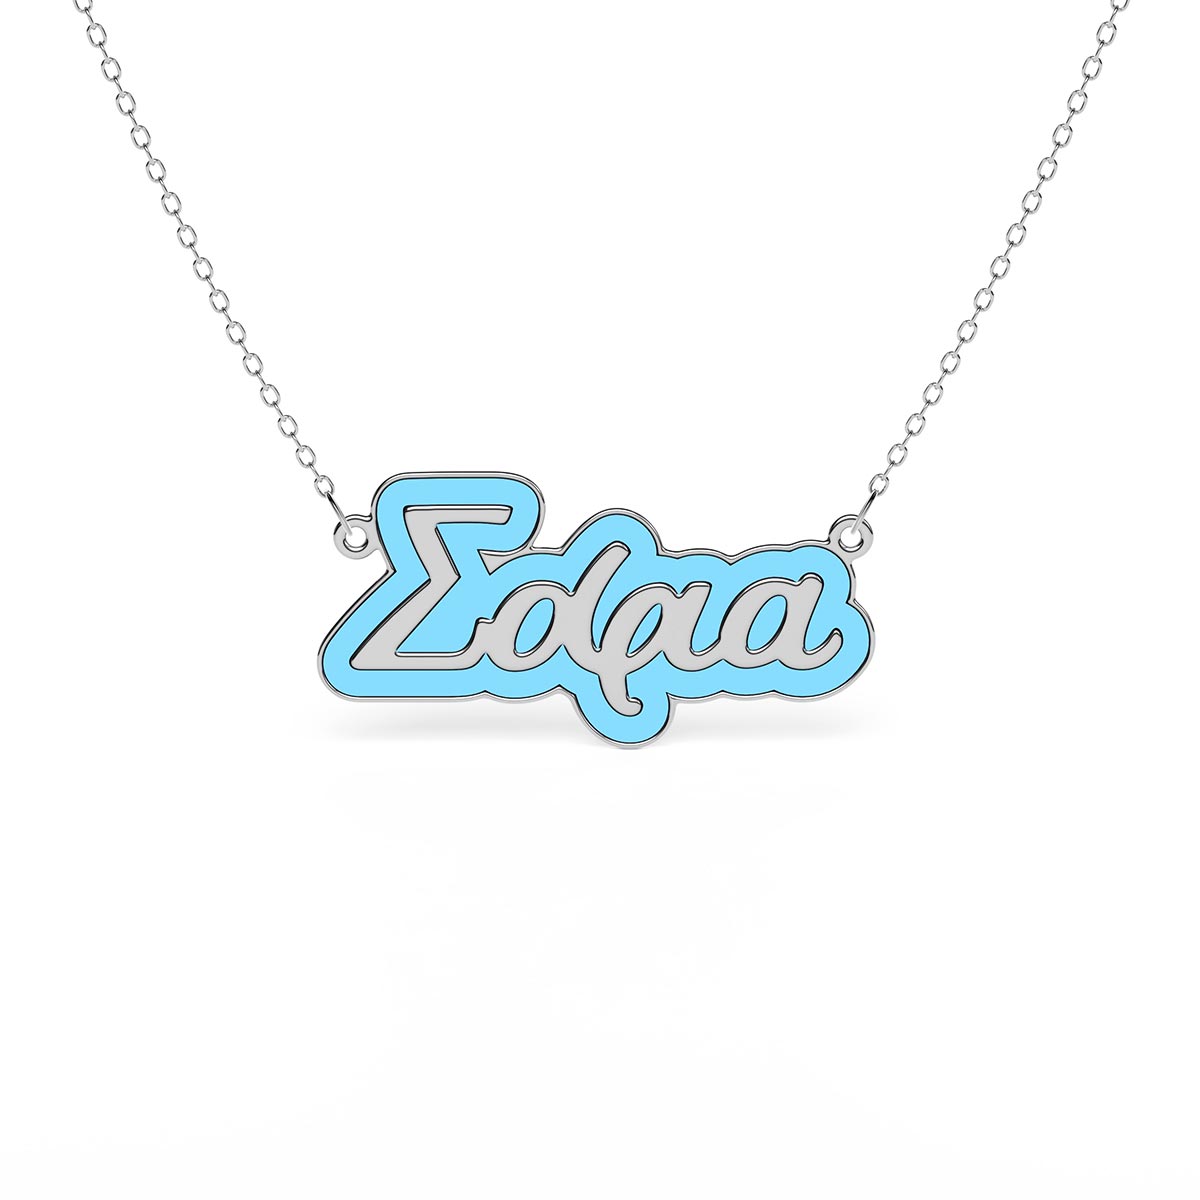 Greek Name Necklace with Turquoise Enamel Outline